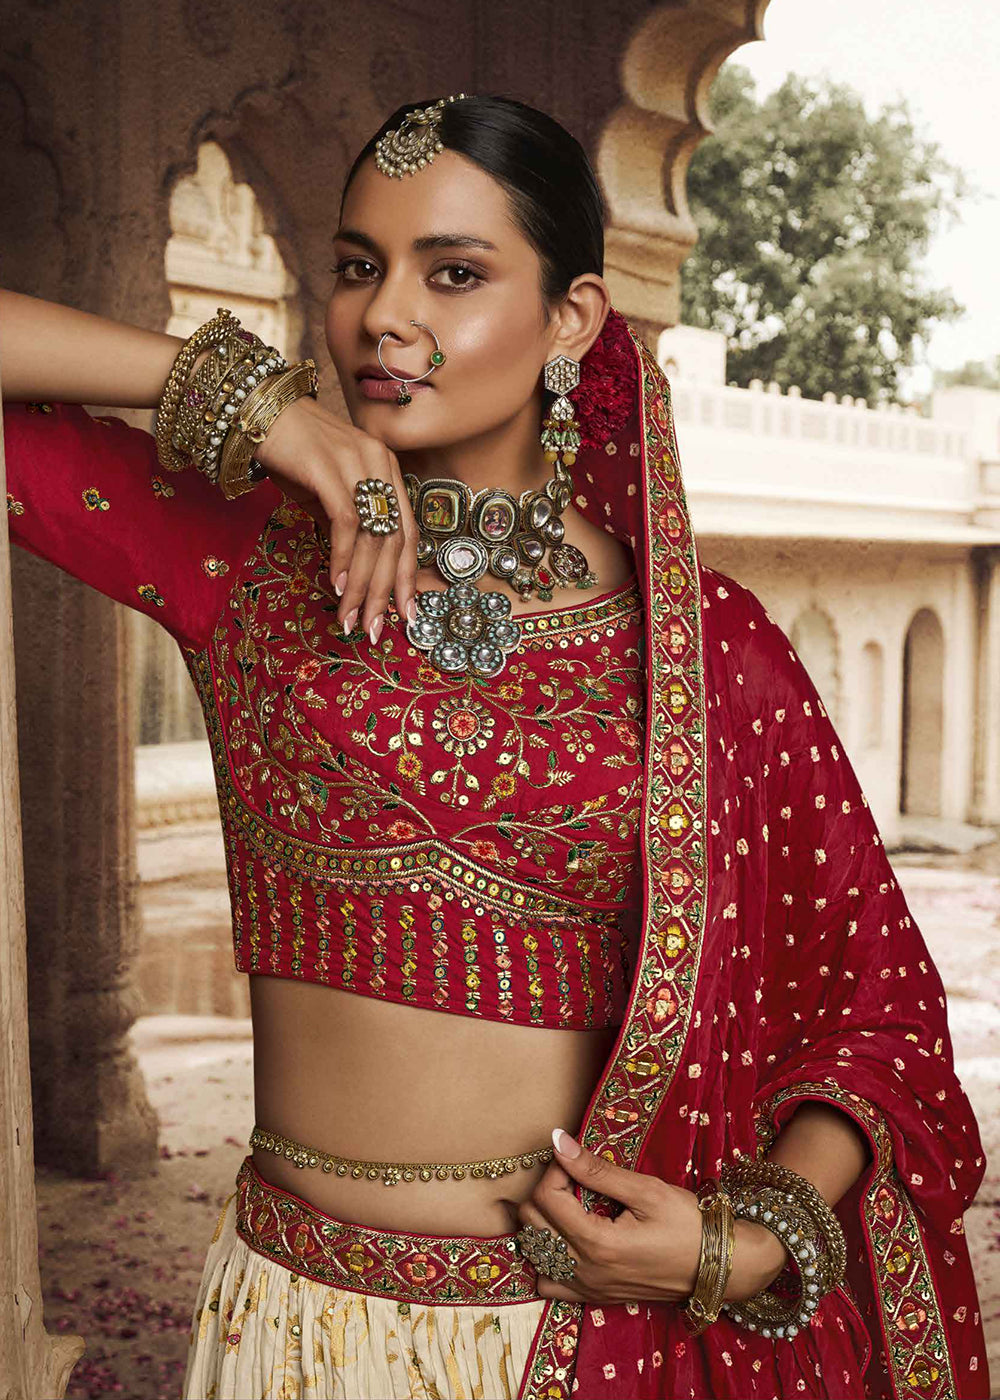 Buy Now Heavy Viscose Cream & Red Embroidered Bridal Lehenga Choli Online in USA, UK, Canada & Worldwide at Empress Clothing. 